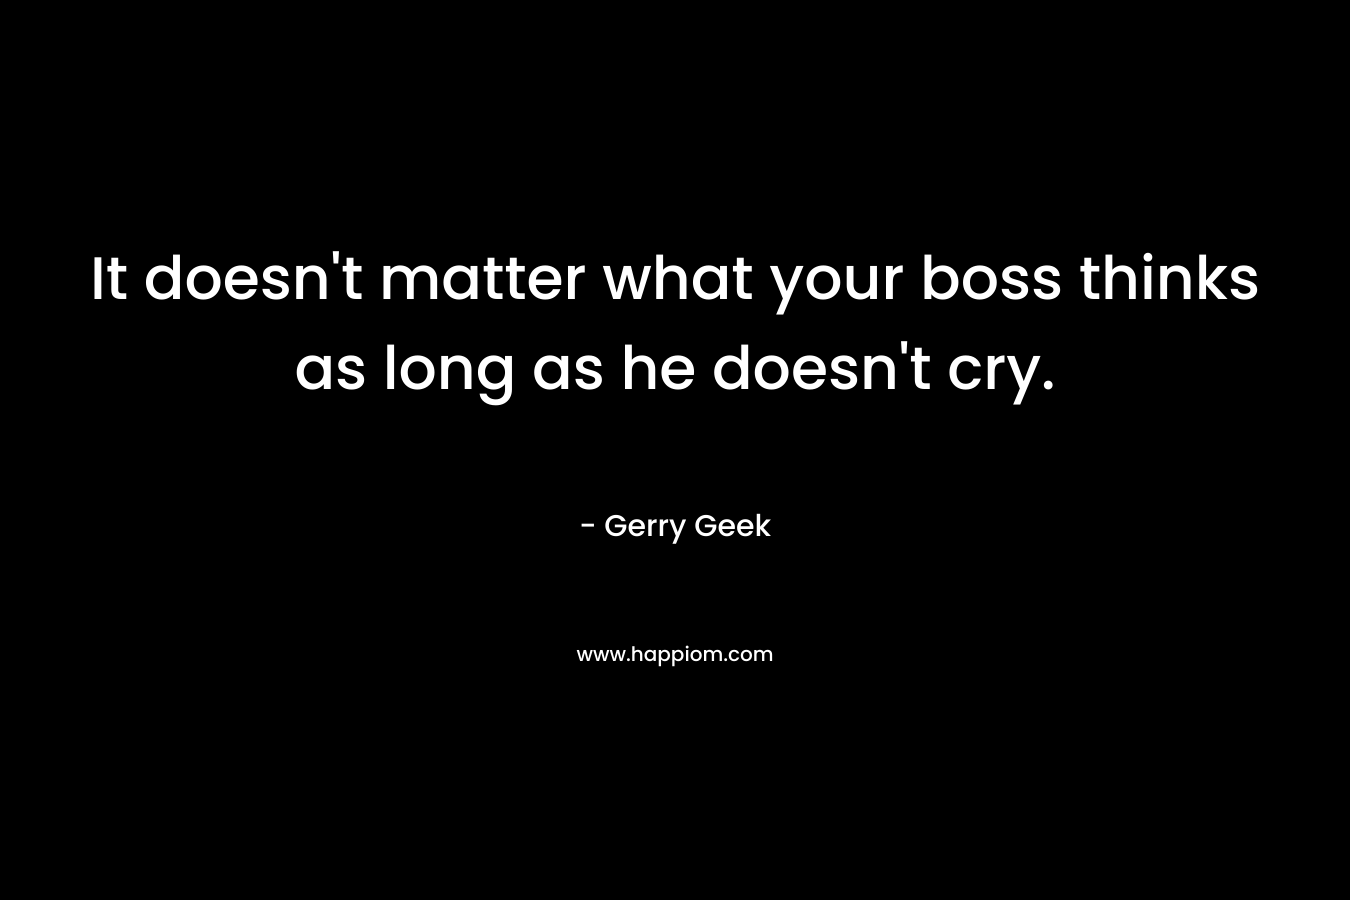 It doesn’t matter what your boss thinks as long as he doesn’t cry. – Gerry Geek